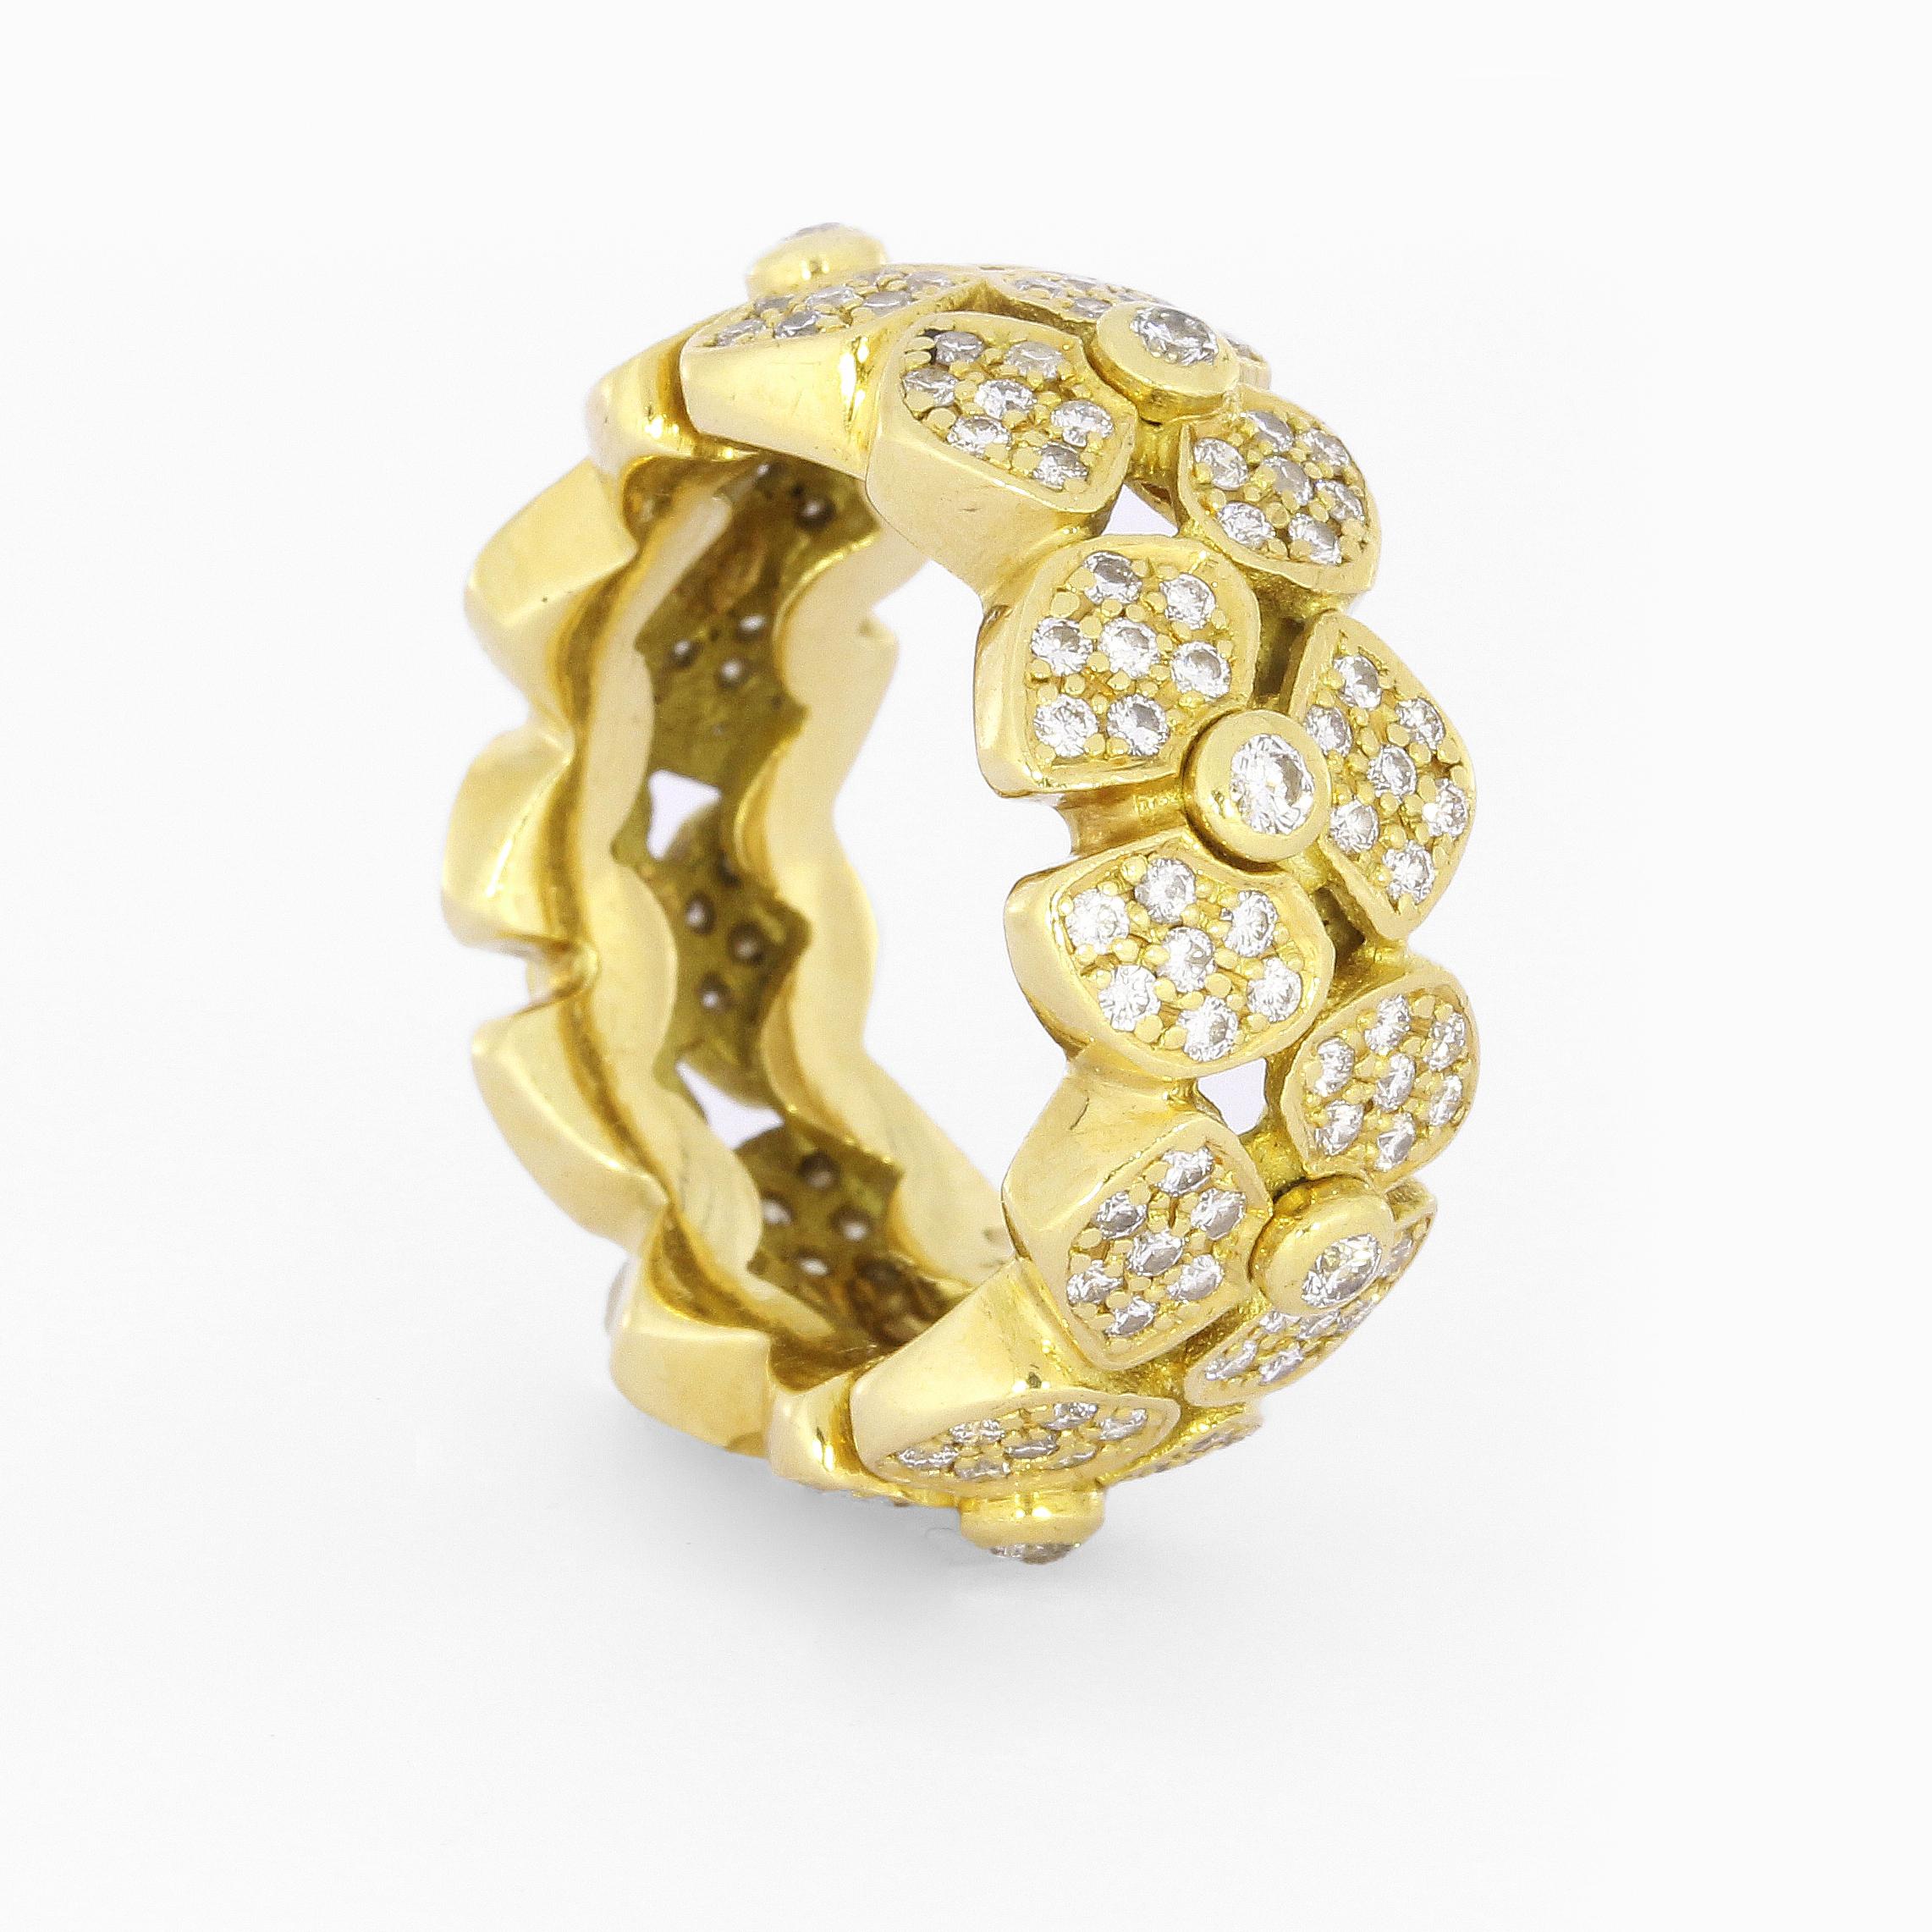 1.47 Carat Floral Yellow Gold Diamond Band Ring In Good Condition For Sale In Berlin, DE